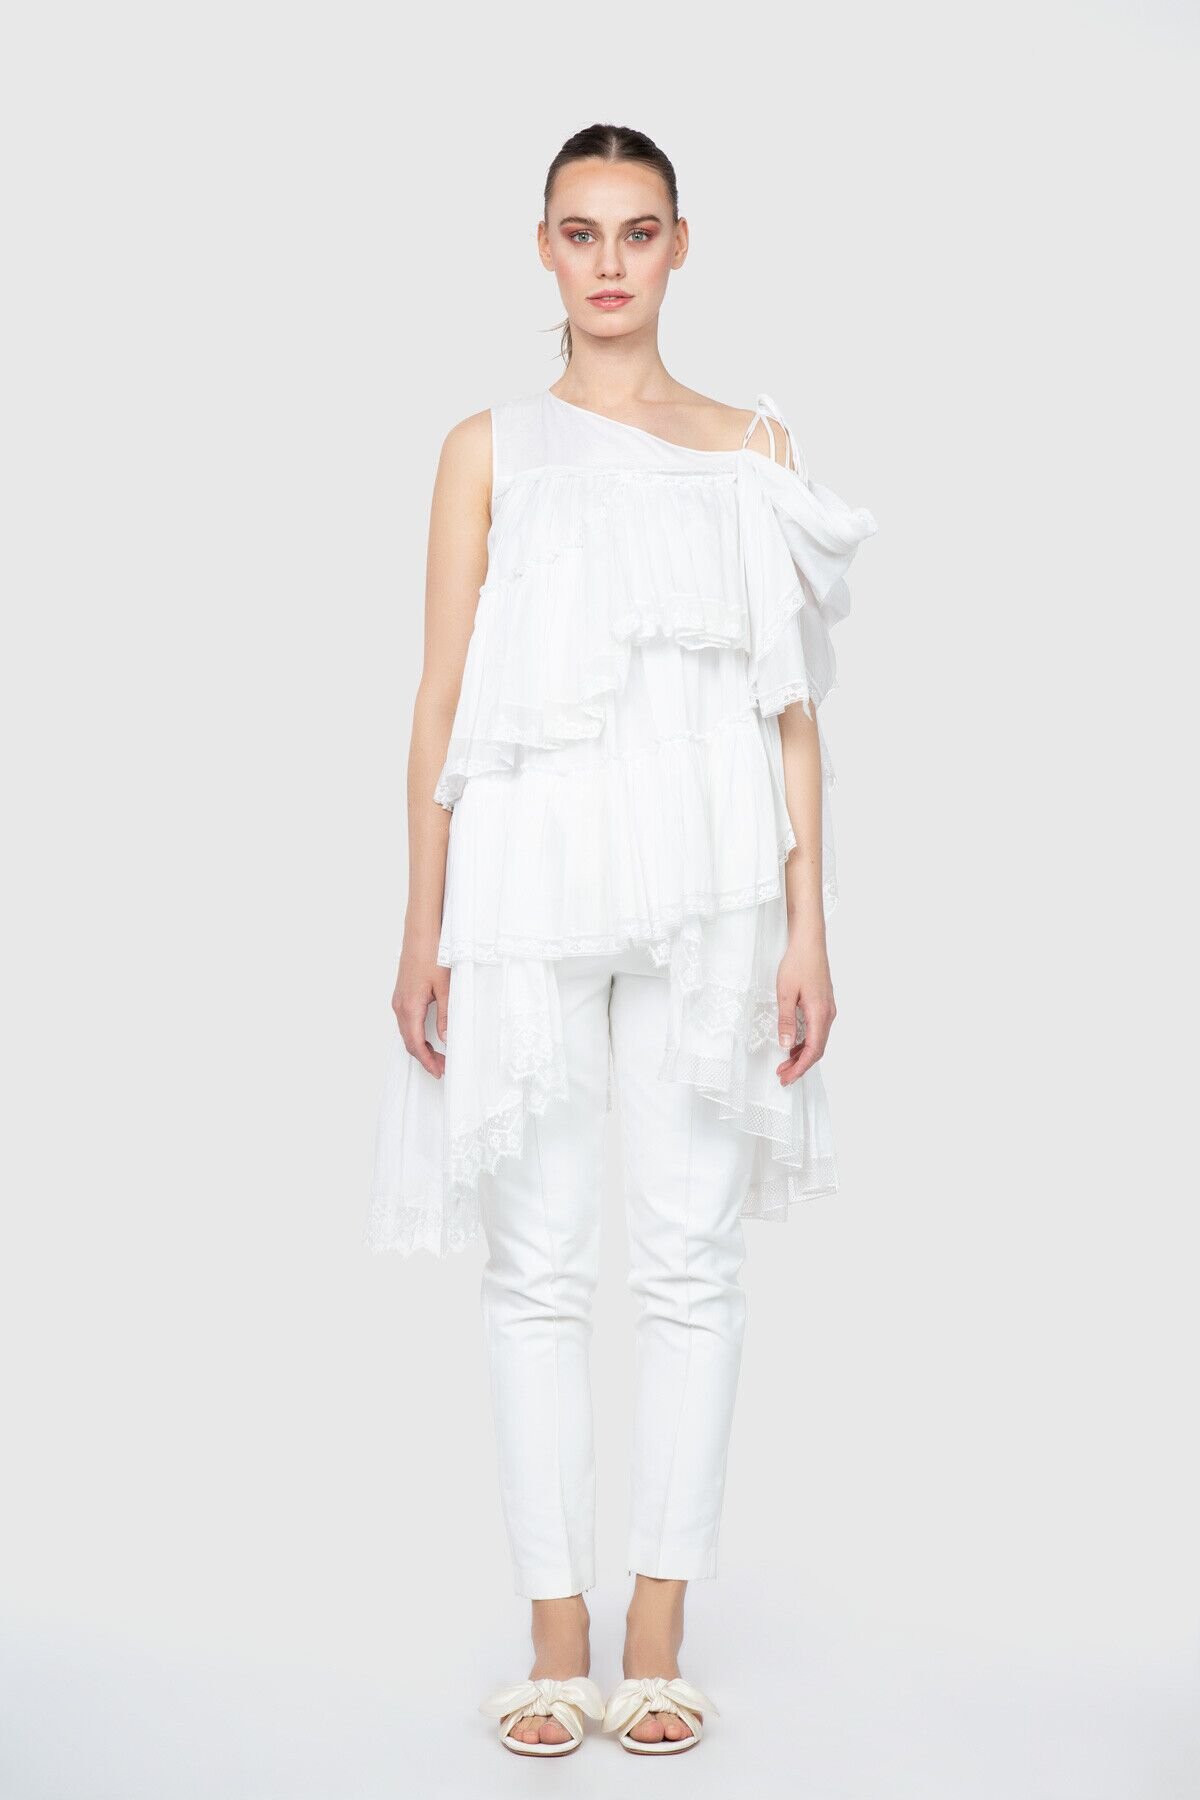 Shoulder Detailed Pleated White Dress